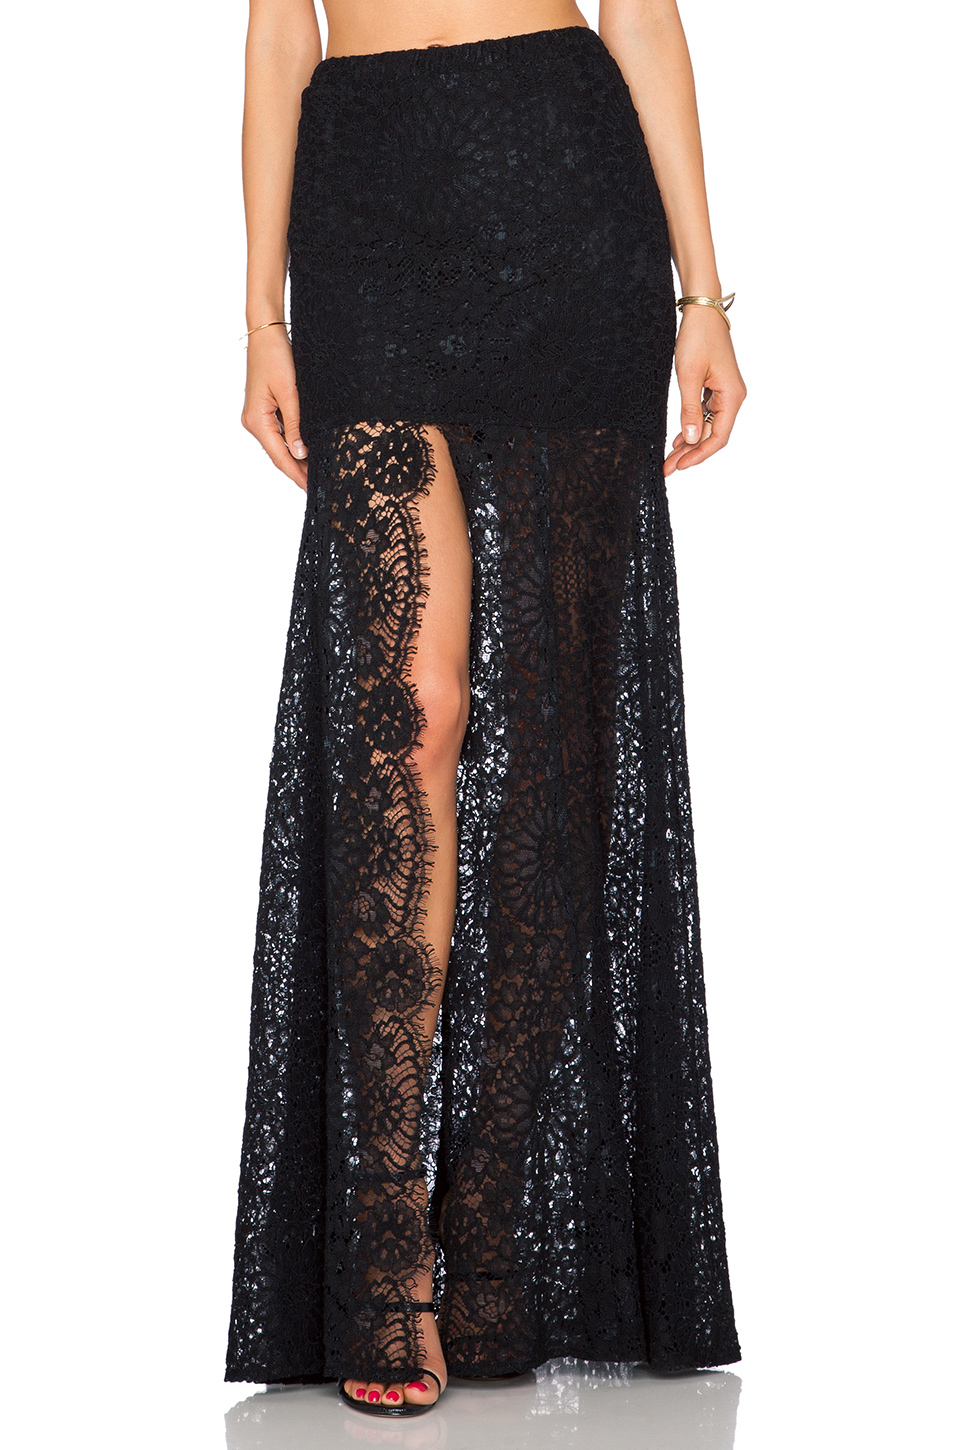 Lyst - Alexis Hermes Lace Maxi Skirt in Black